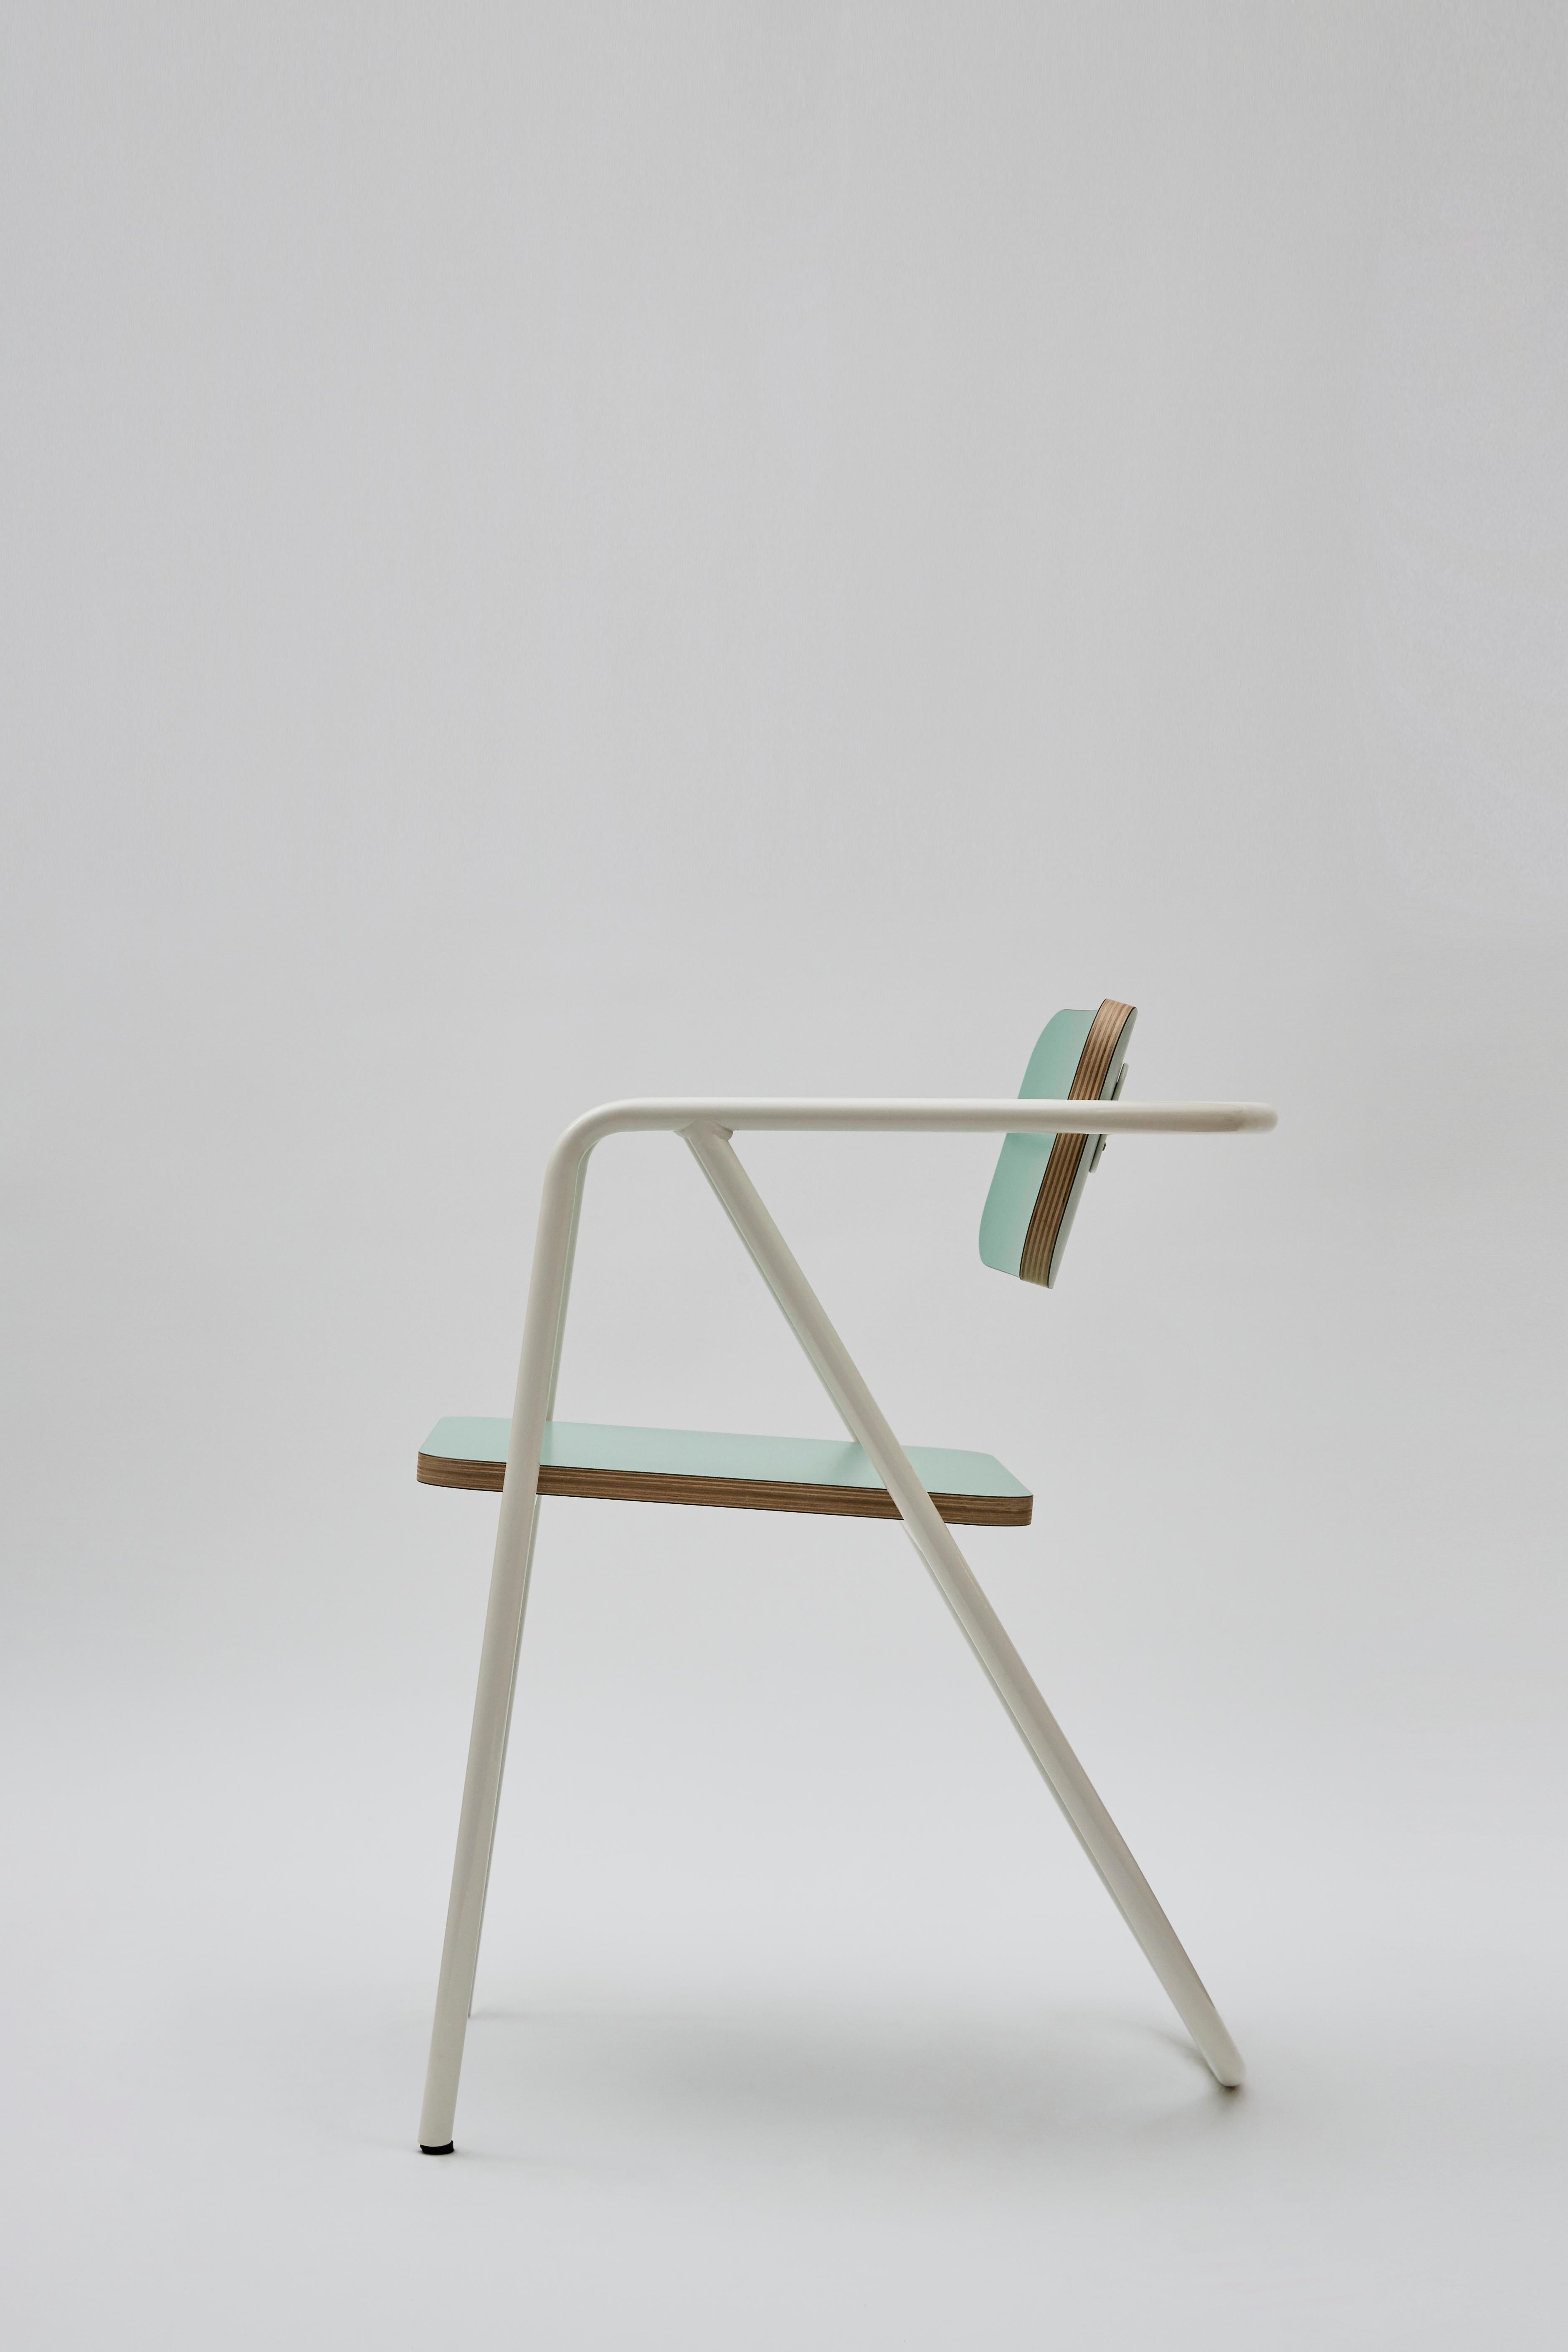 Other La Misciù Chair, Teal & Ivory For Sale